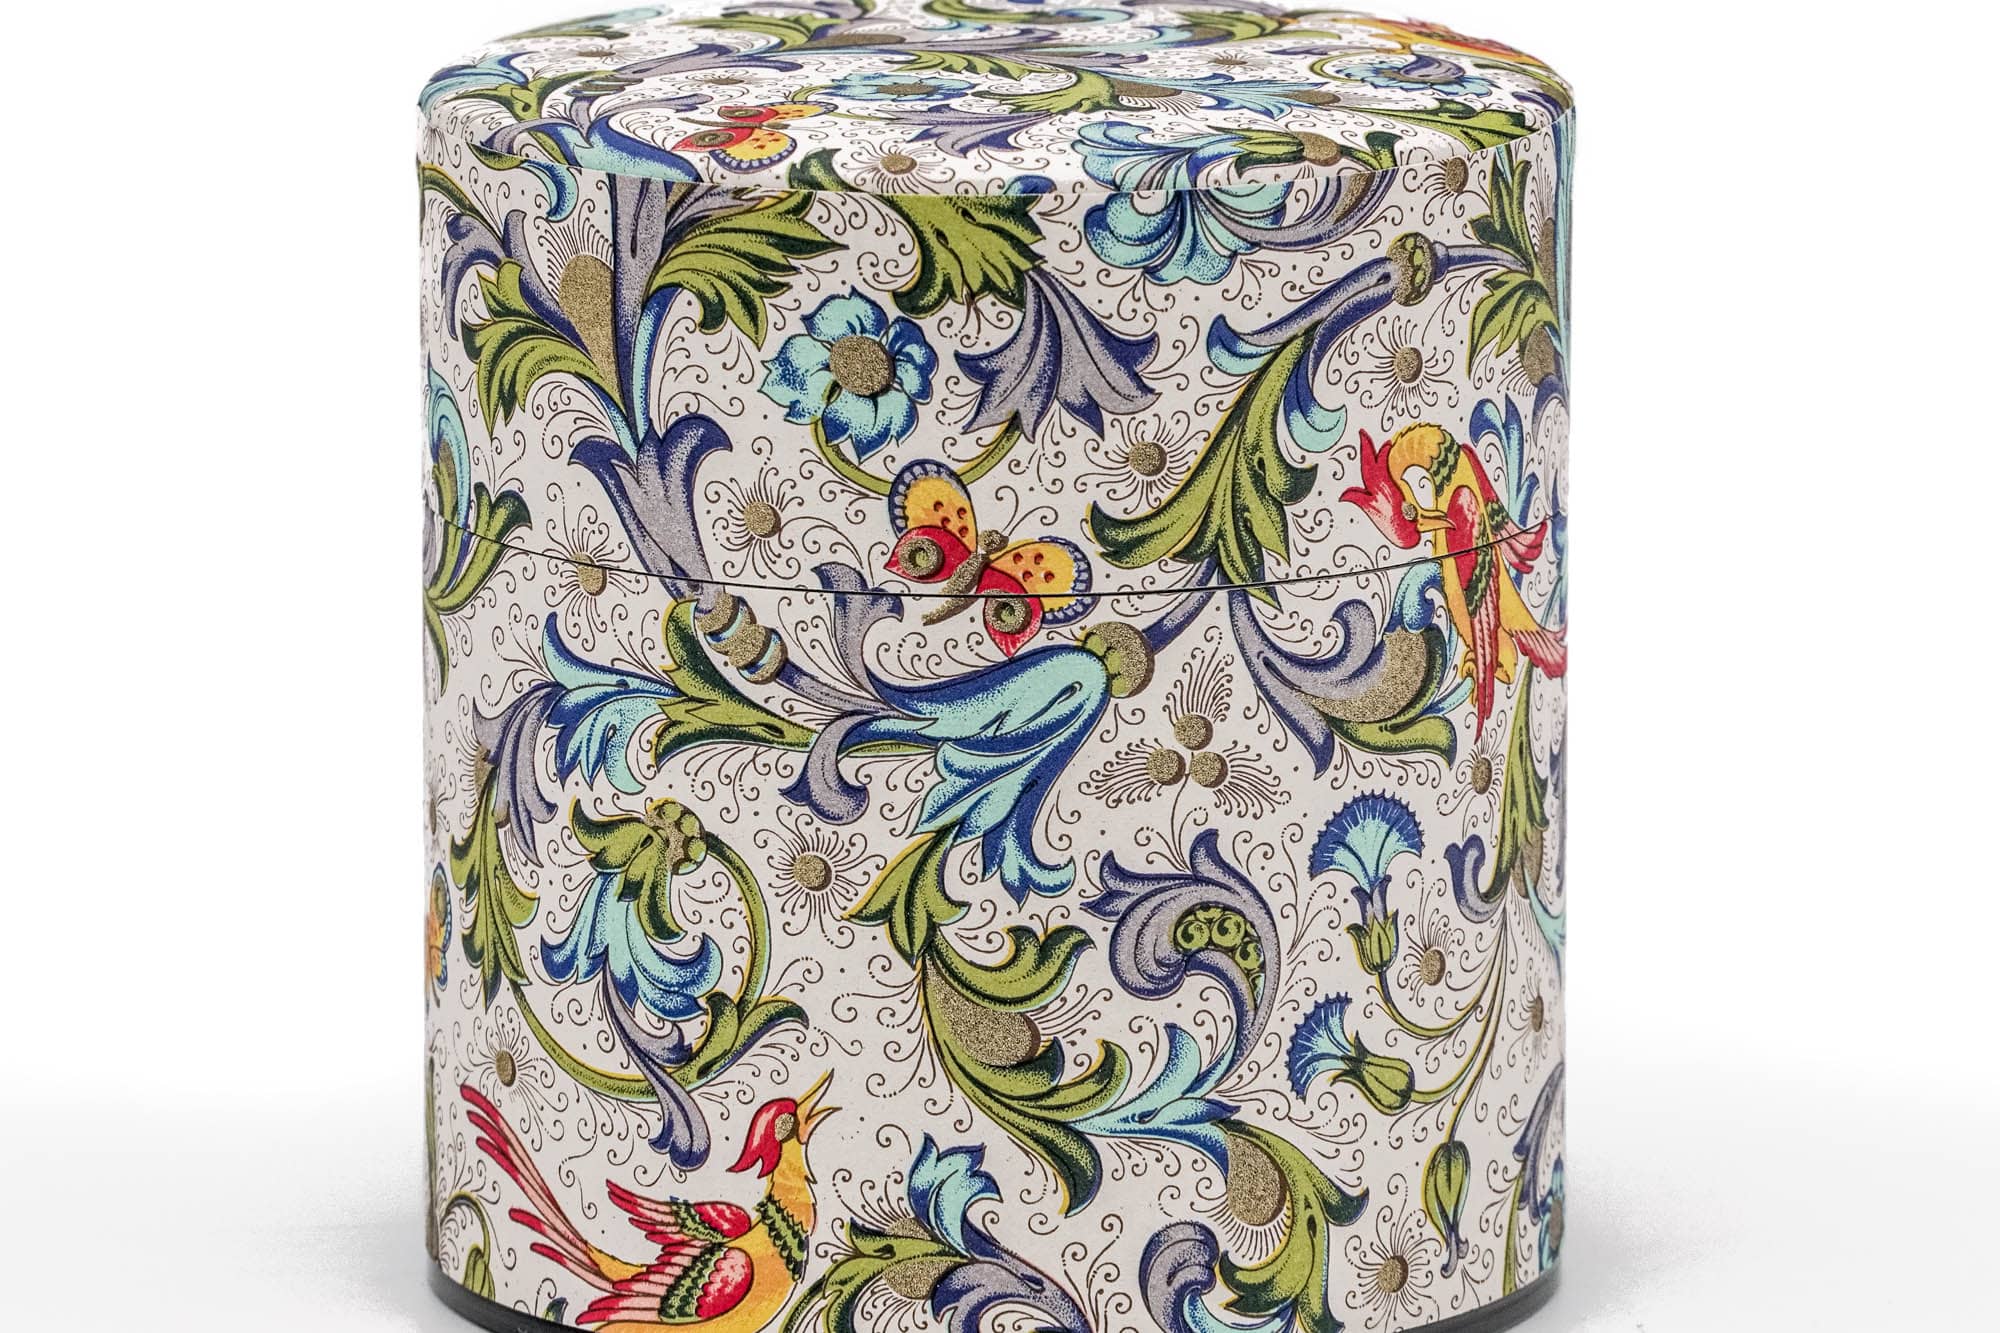 Japanese Chazutsu - 江東堂 Kotodo - Floral Butterfly Rooster Washi Wrapped Metal Tea Canister - 100g